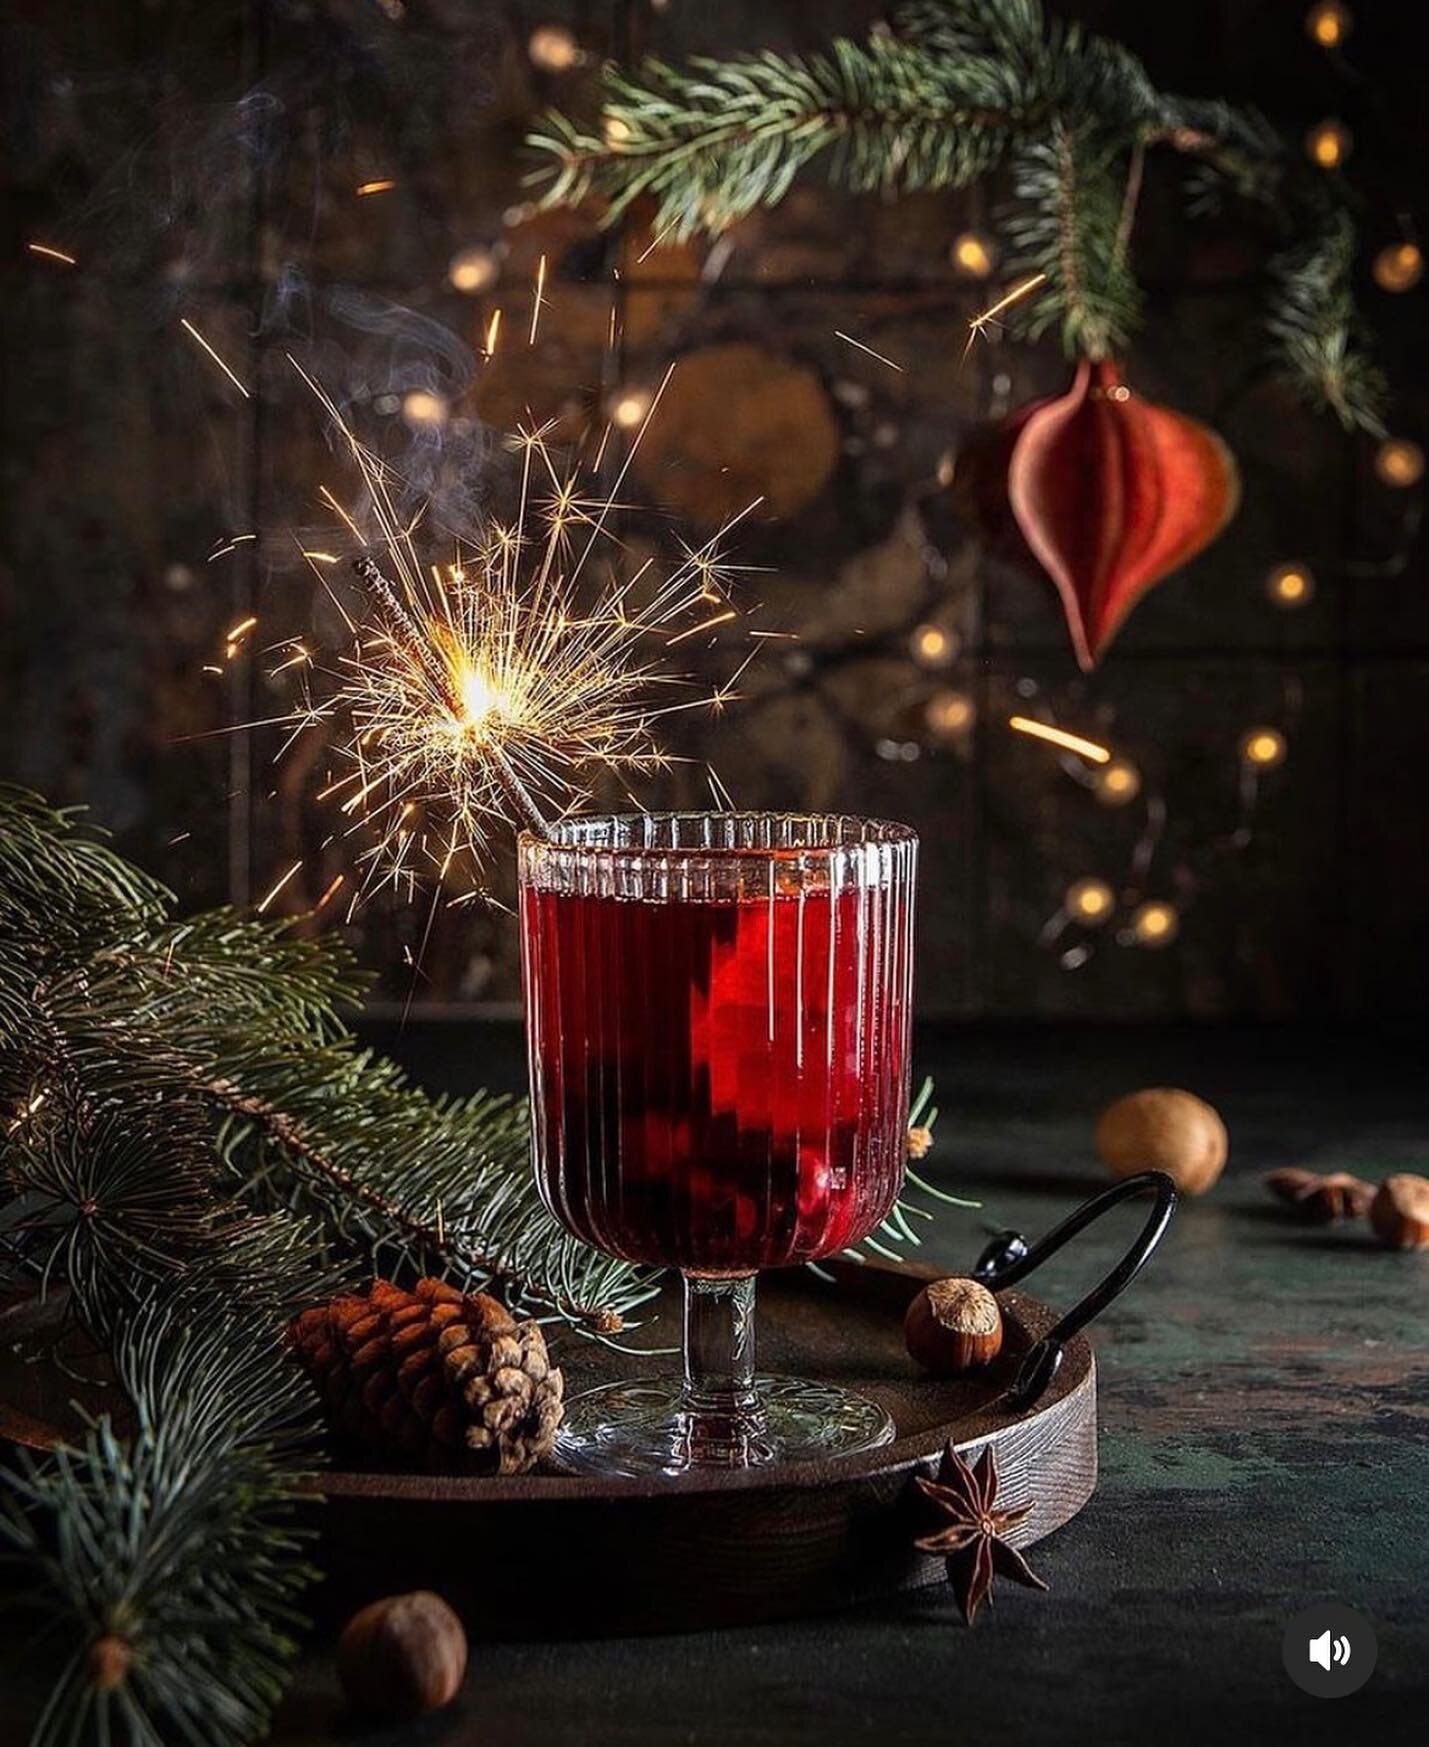 Feeling festive with this weekend treat from @m.a.y_a.k

What kind of mood can you create with just some props and great light?

We have everything you need here at the studio. Come and play!
.
.
.
.
.
#studiohire #photographyinspiration #photography